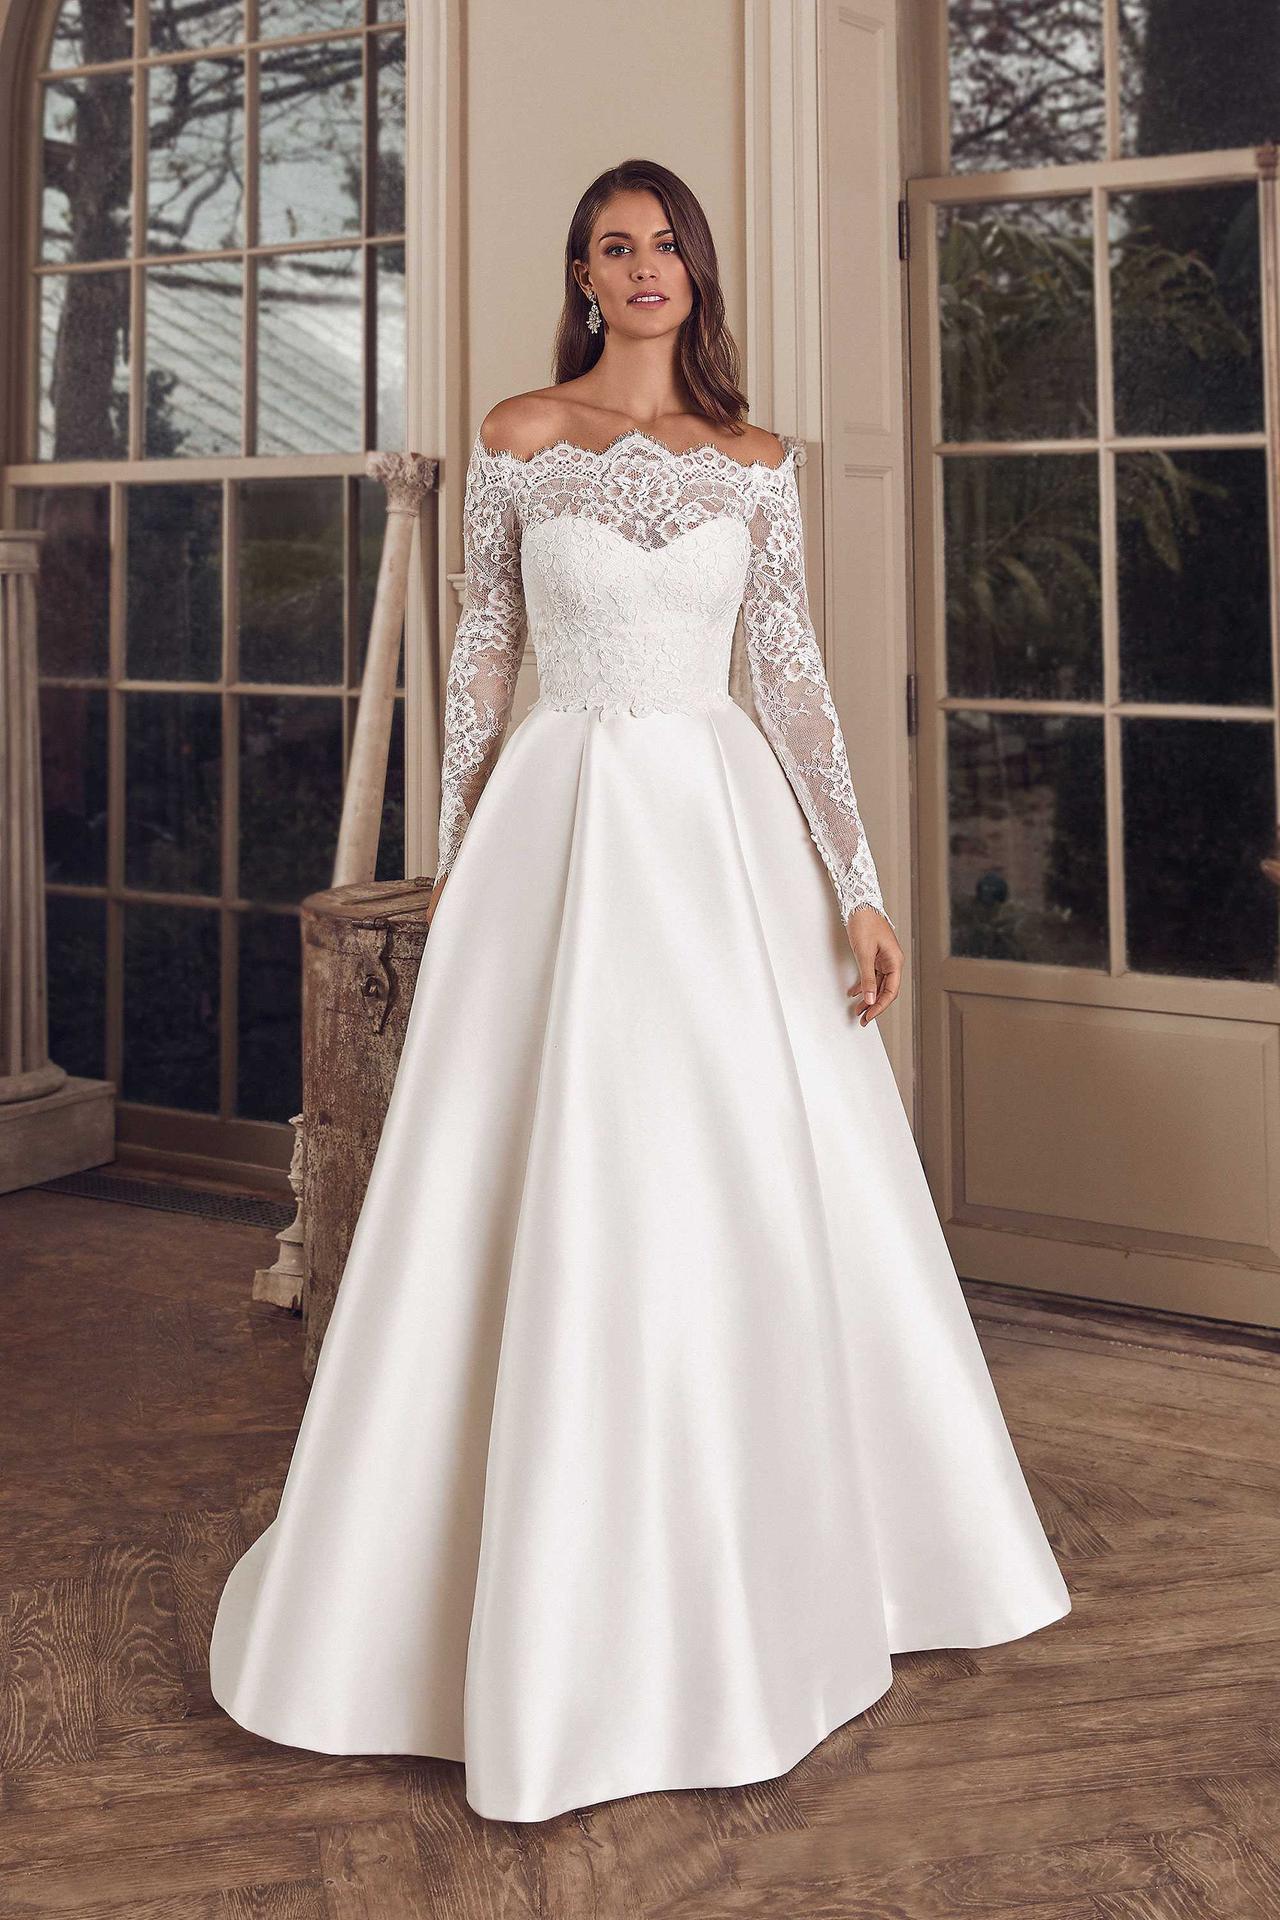 Wedding Gowns for Busty Women, Big Busts Bridals Dress